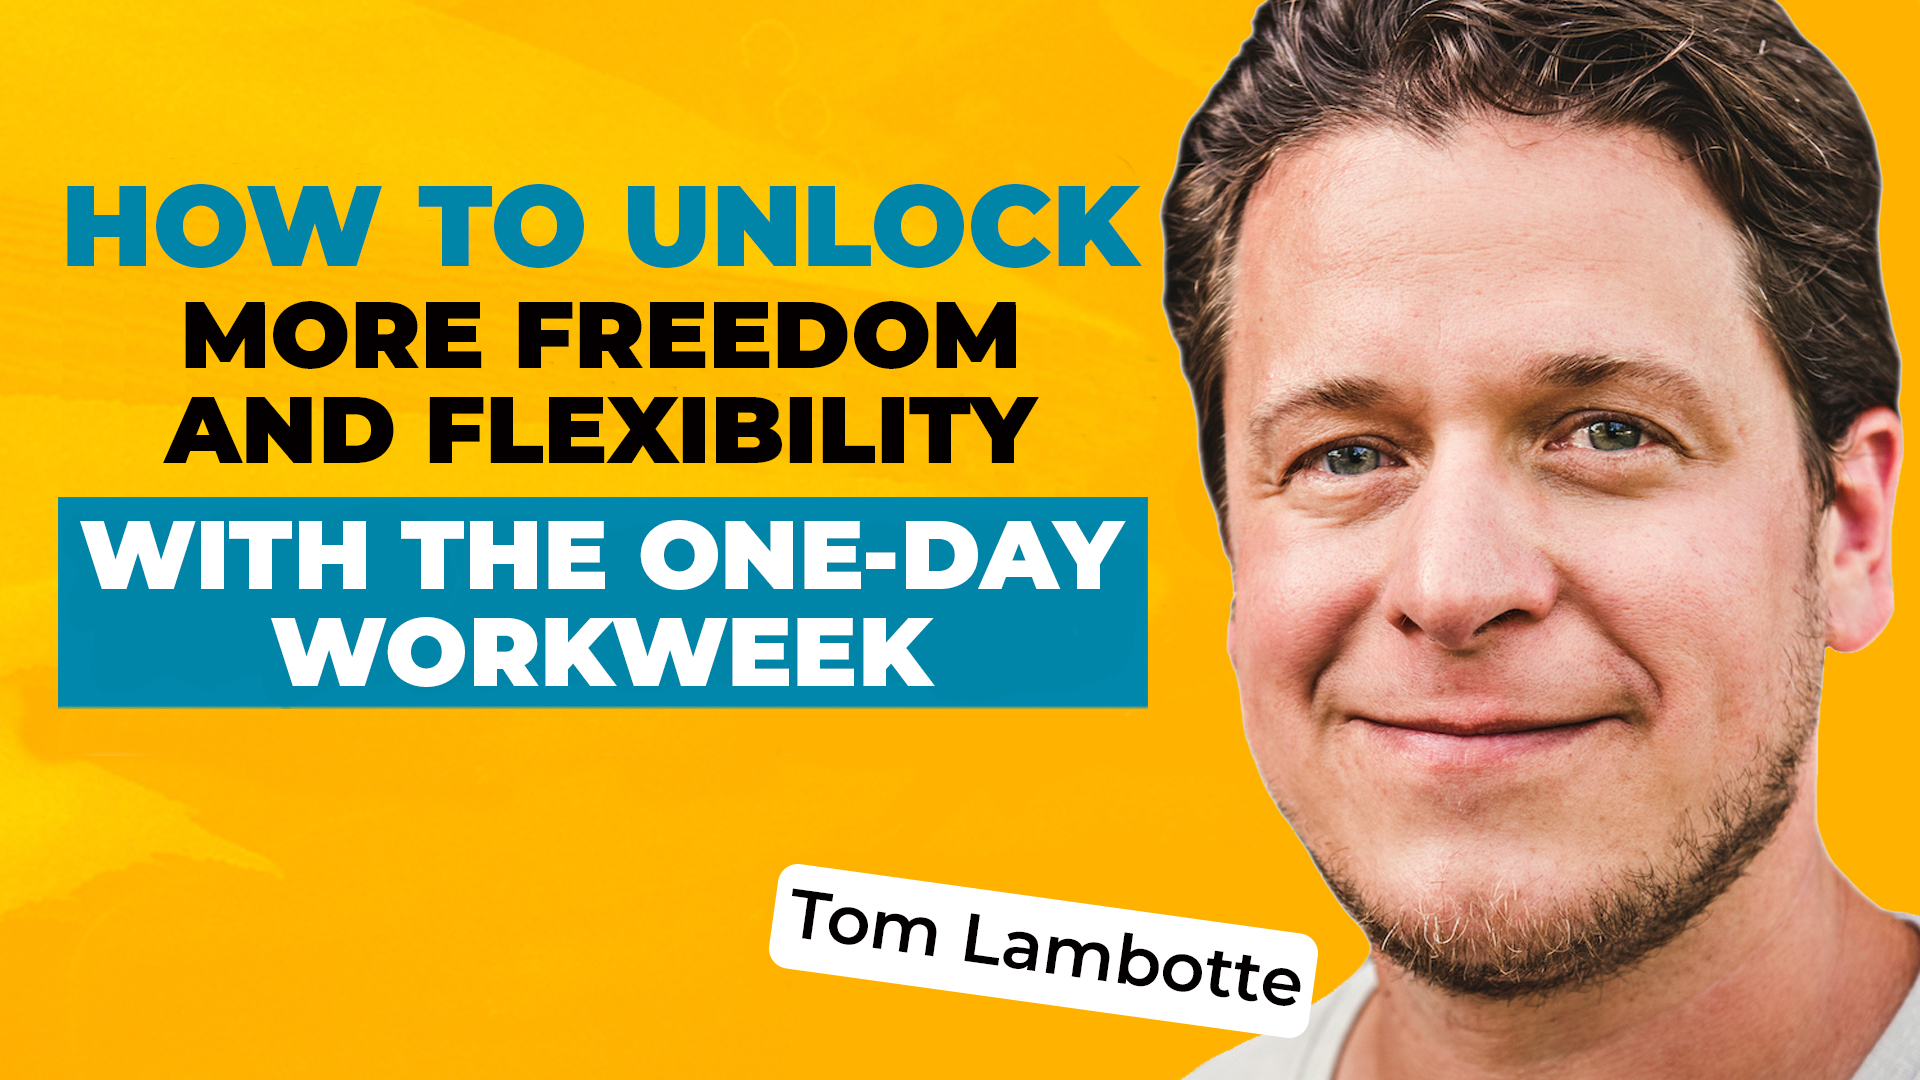 A photo of Tom Lambotte on a bold yellow background, along with text reading "How to Unlock More Freedom and Flexibility with the One-Day Workweek."